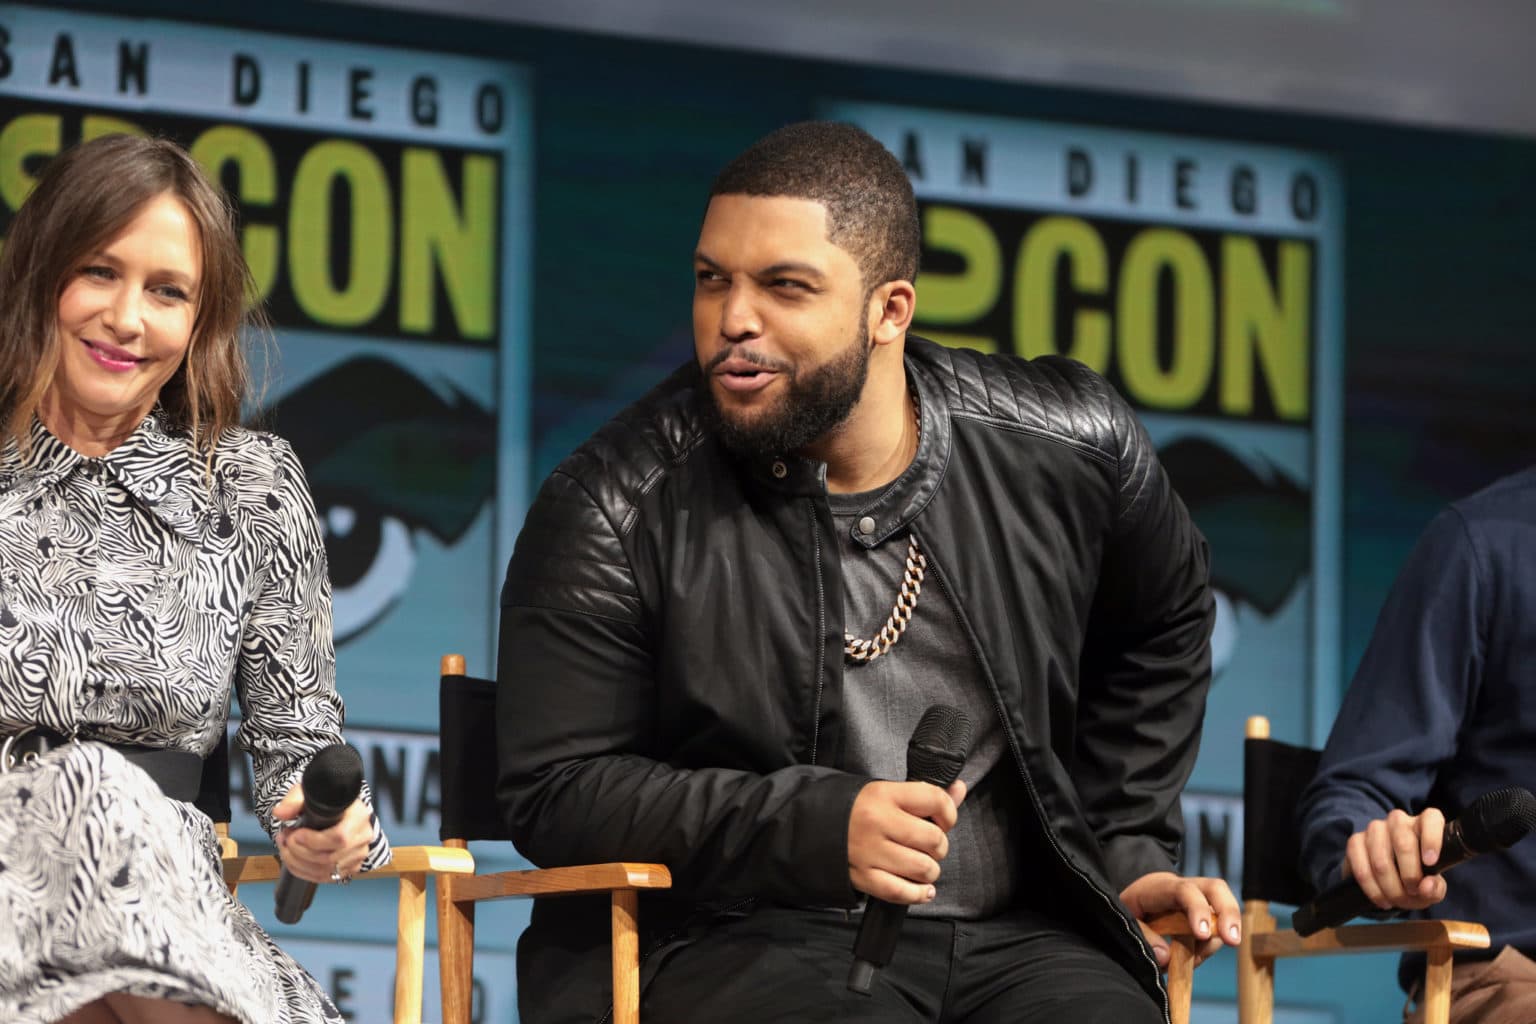 O'Shea Jackson Jr. is bringing his swagger to Apple TV+ basketball show, 